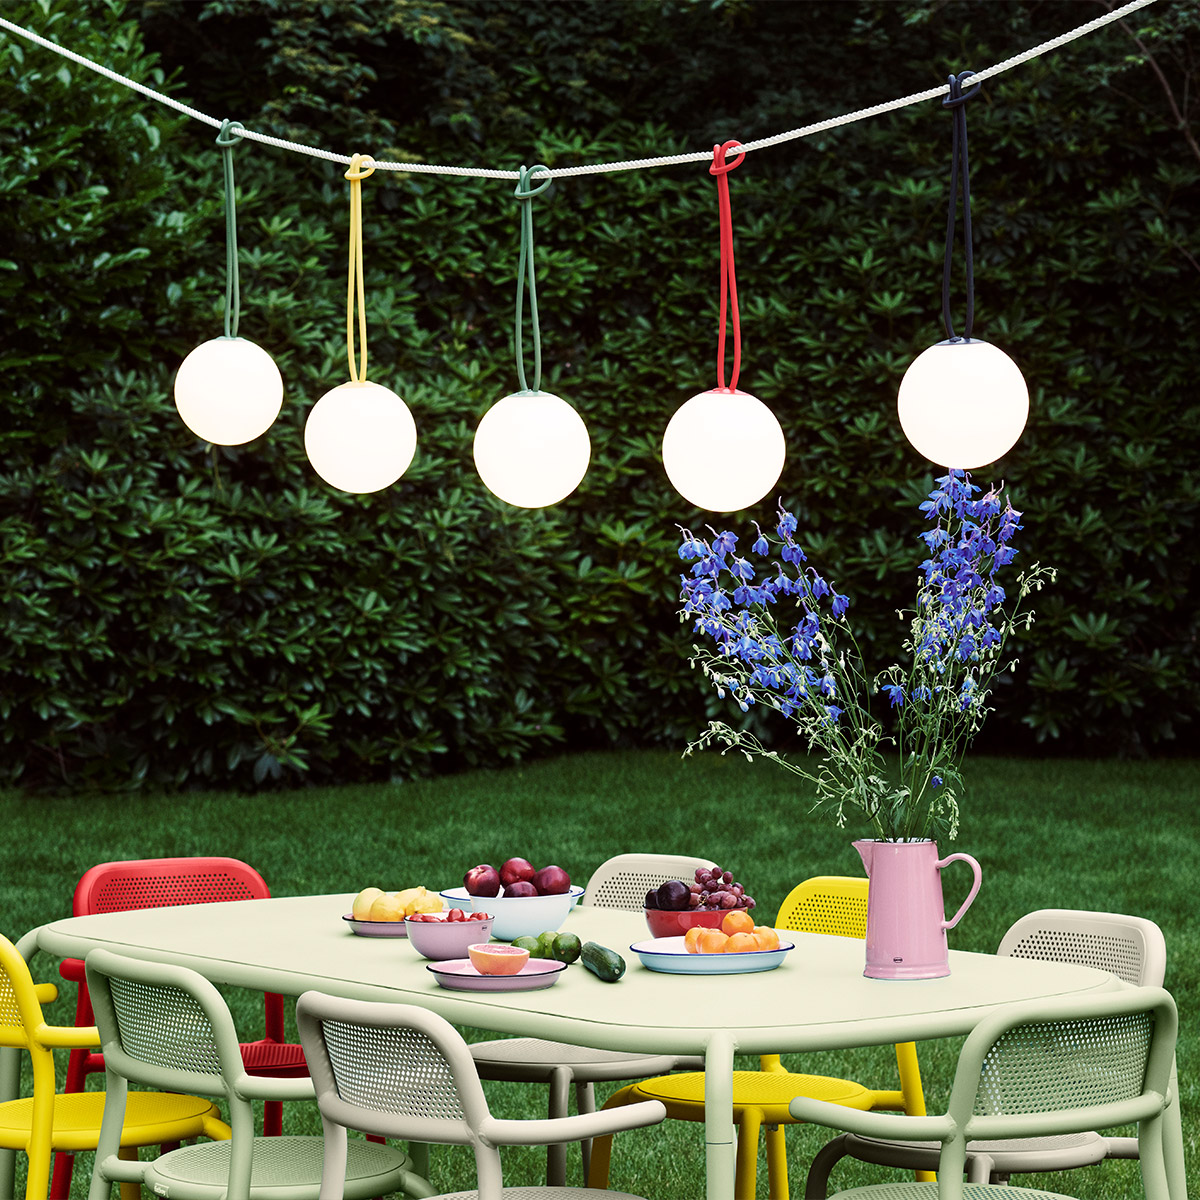 Hanging globe lamps over outdoor table